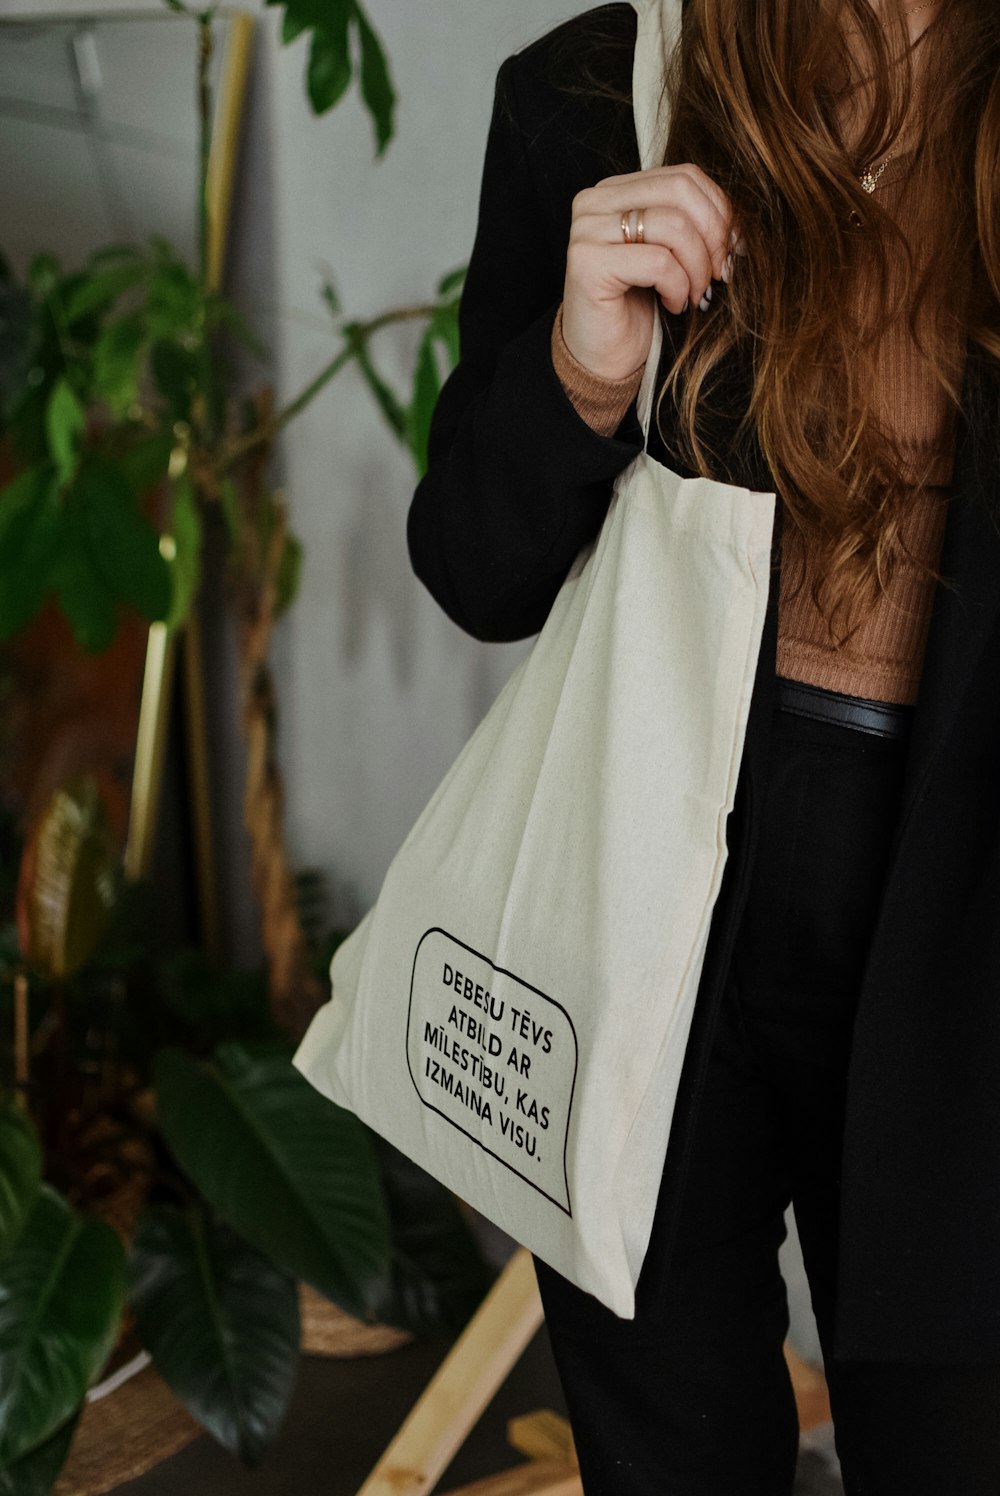 a woman holding a bag with a message on it